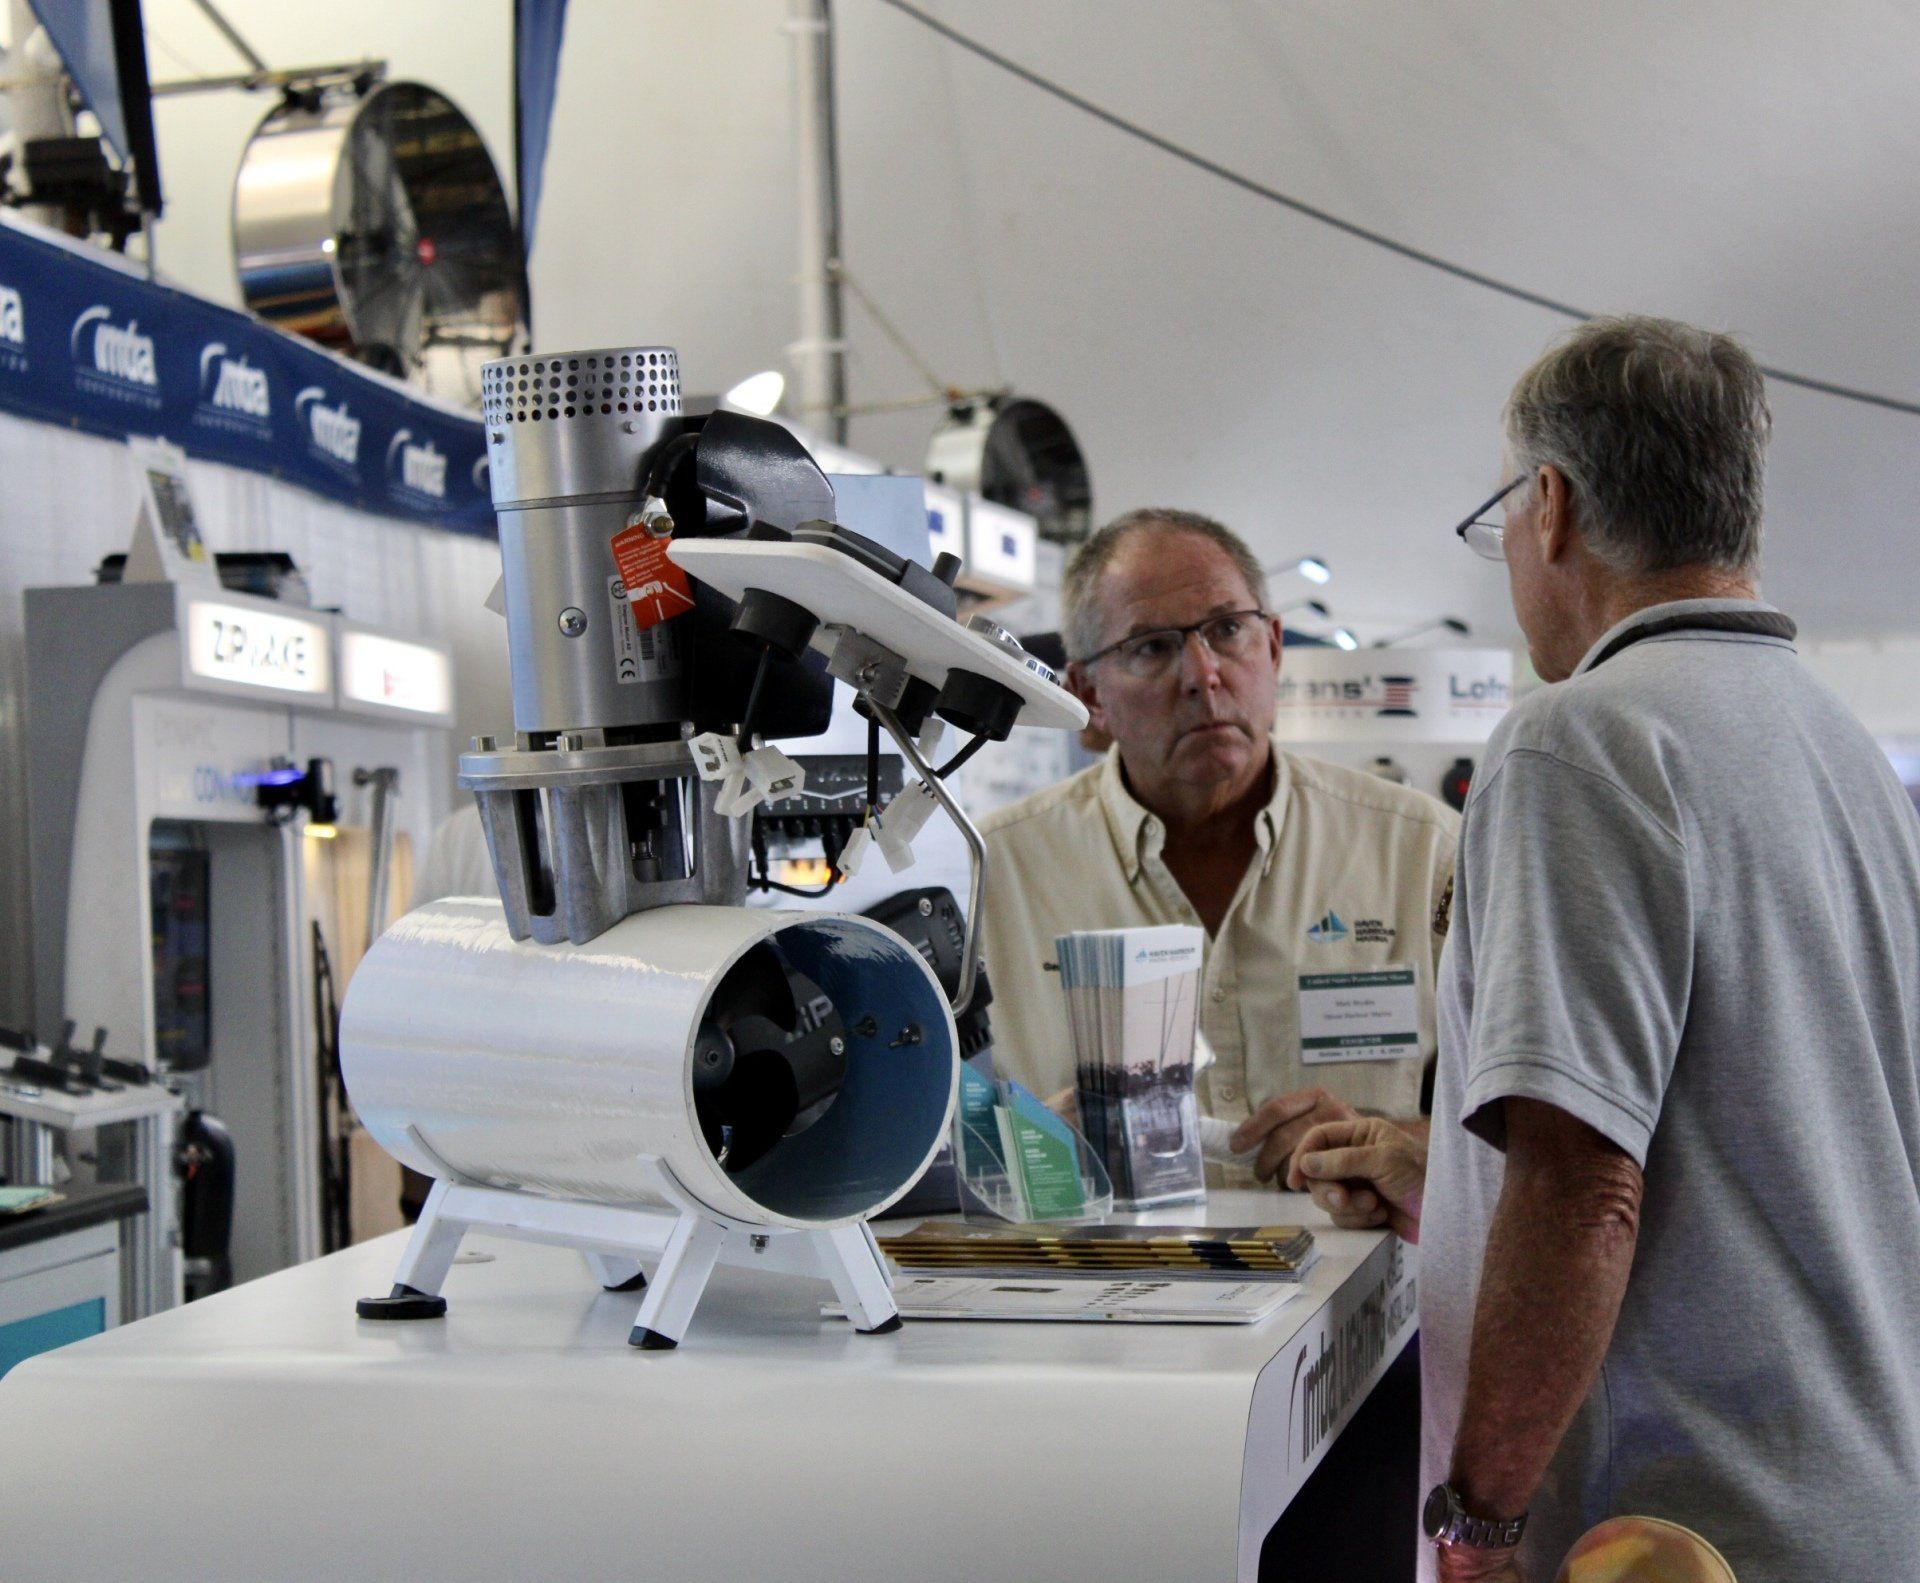 Marina employee speaking with boat show attendee